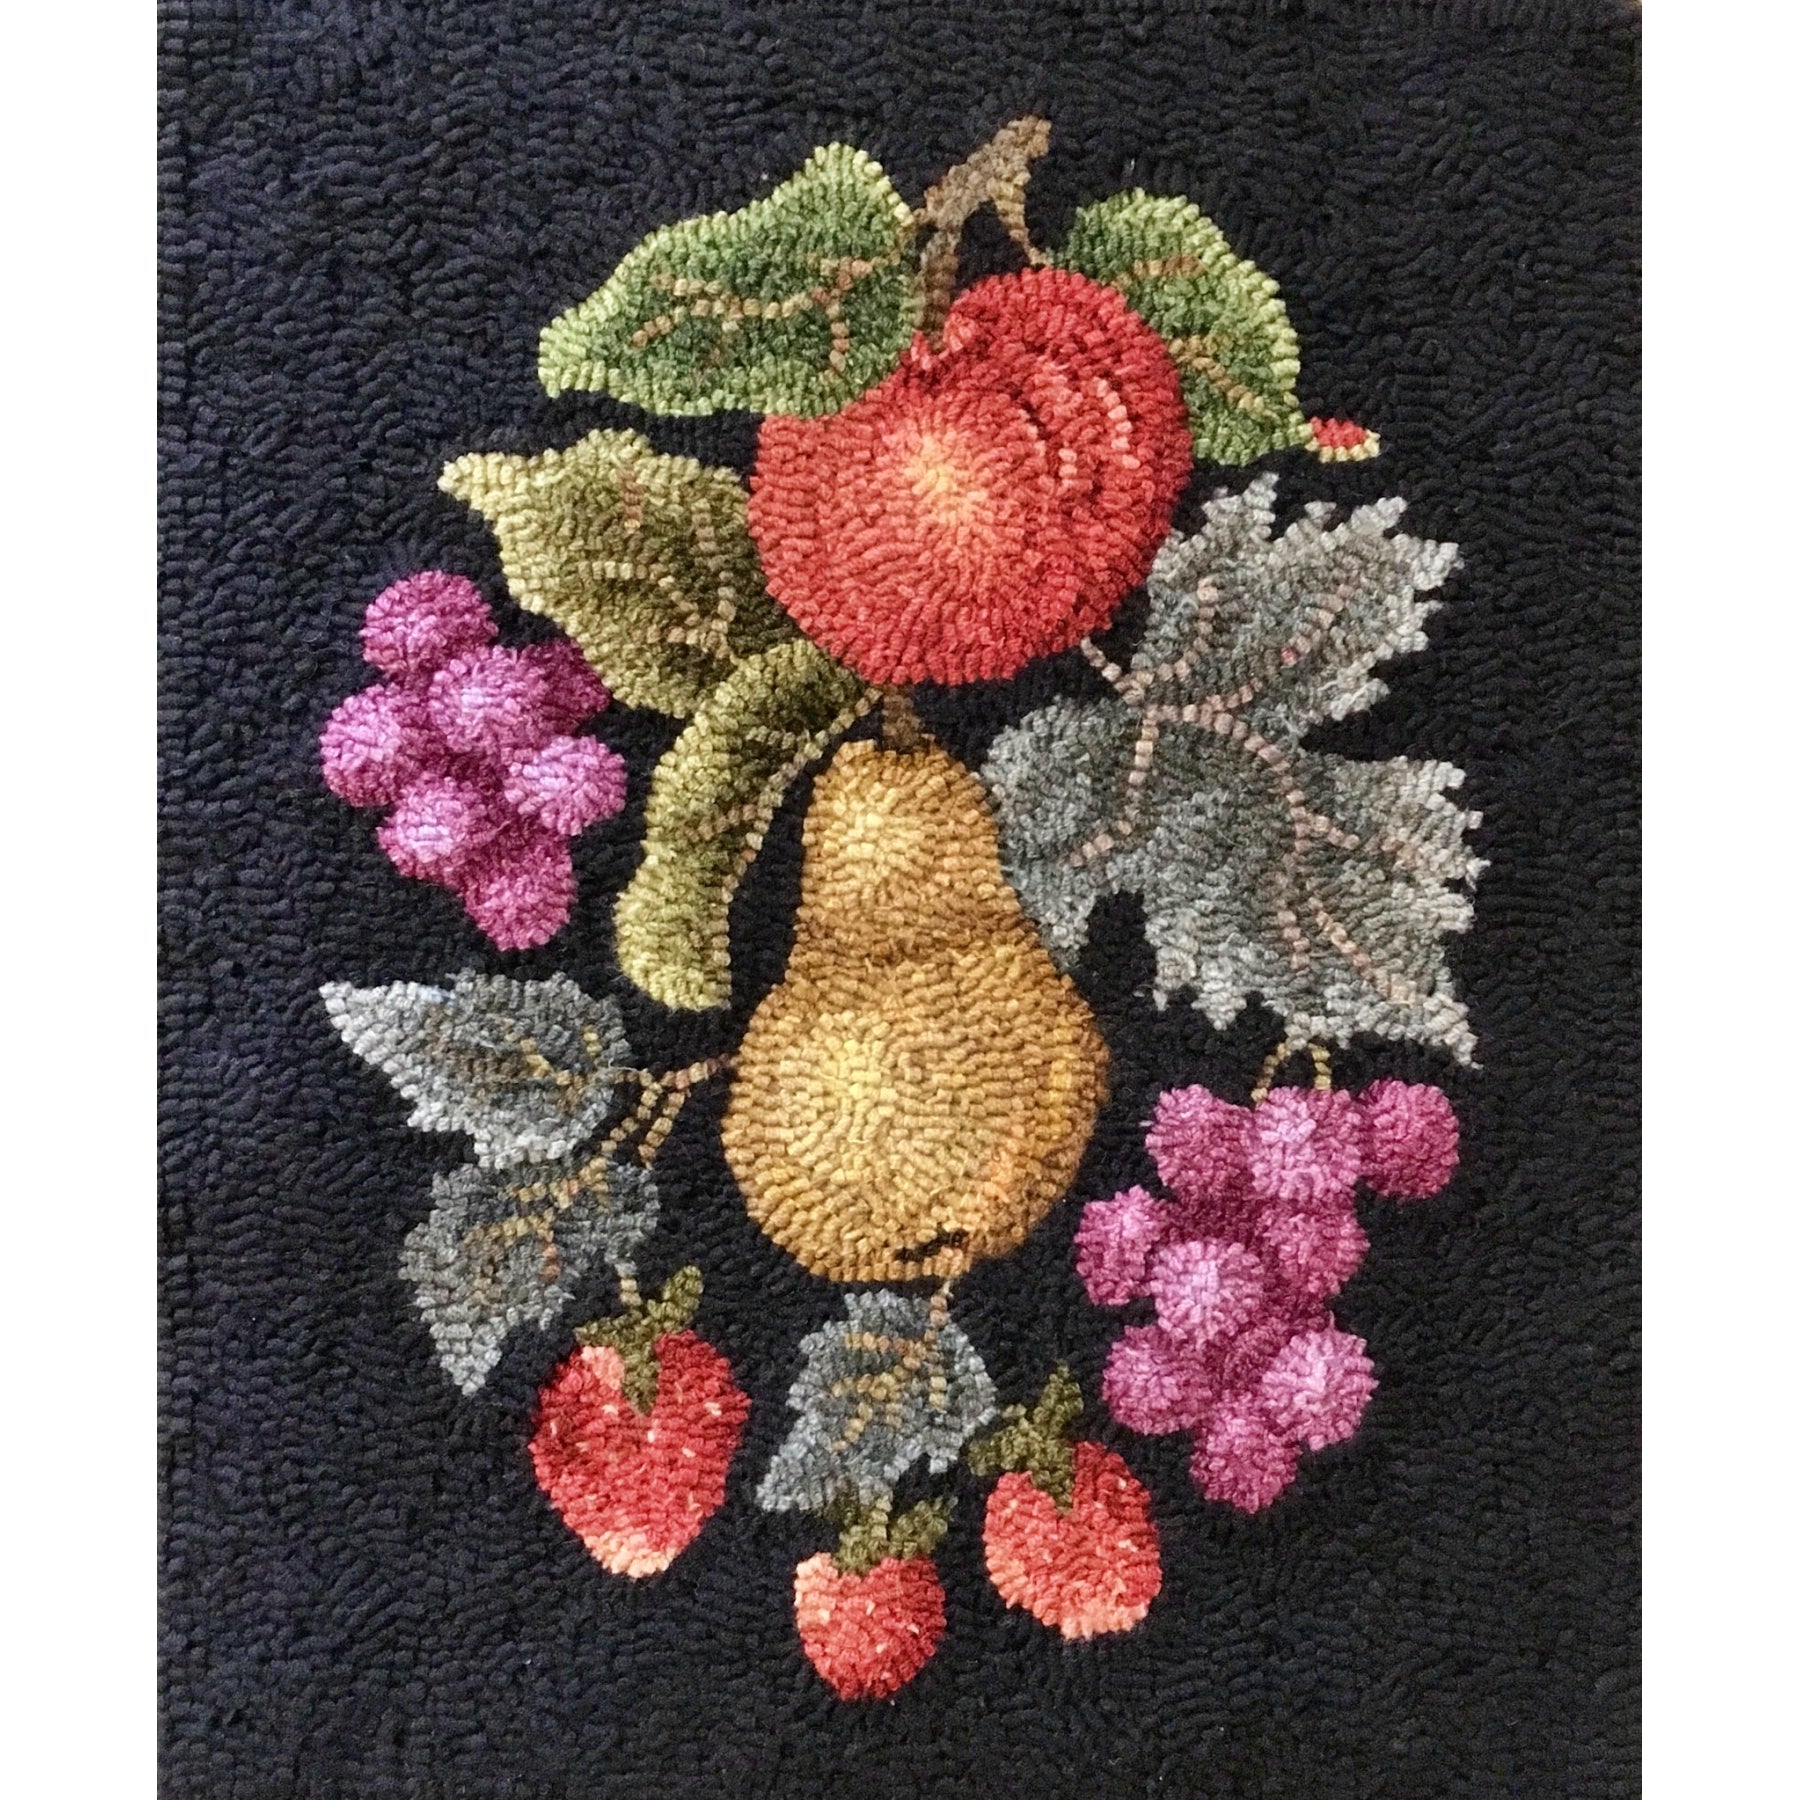 Companion Fruit, rug hooked by Susan Nash